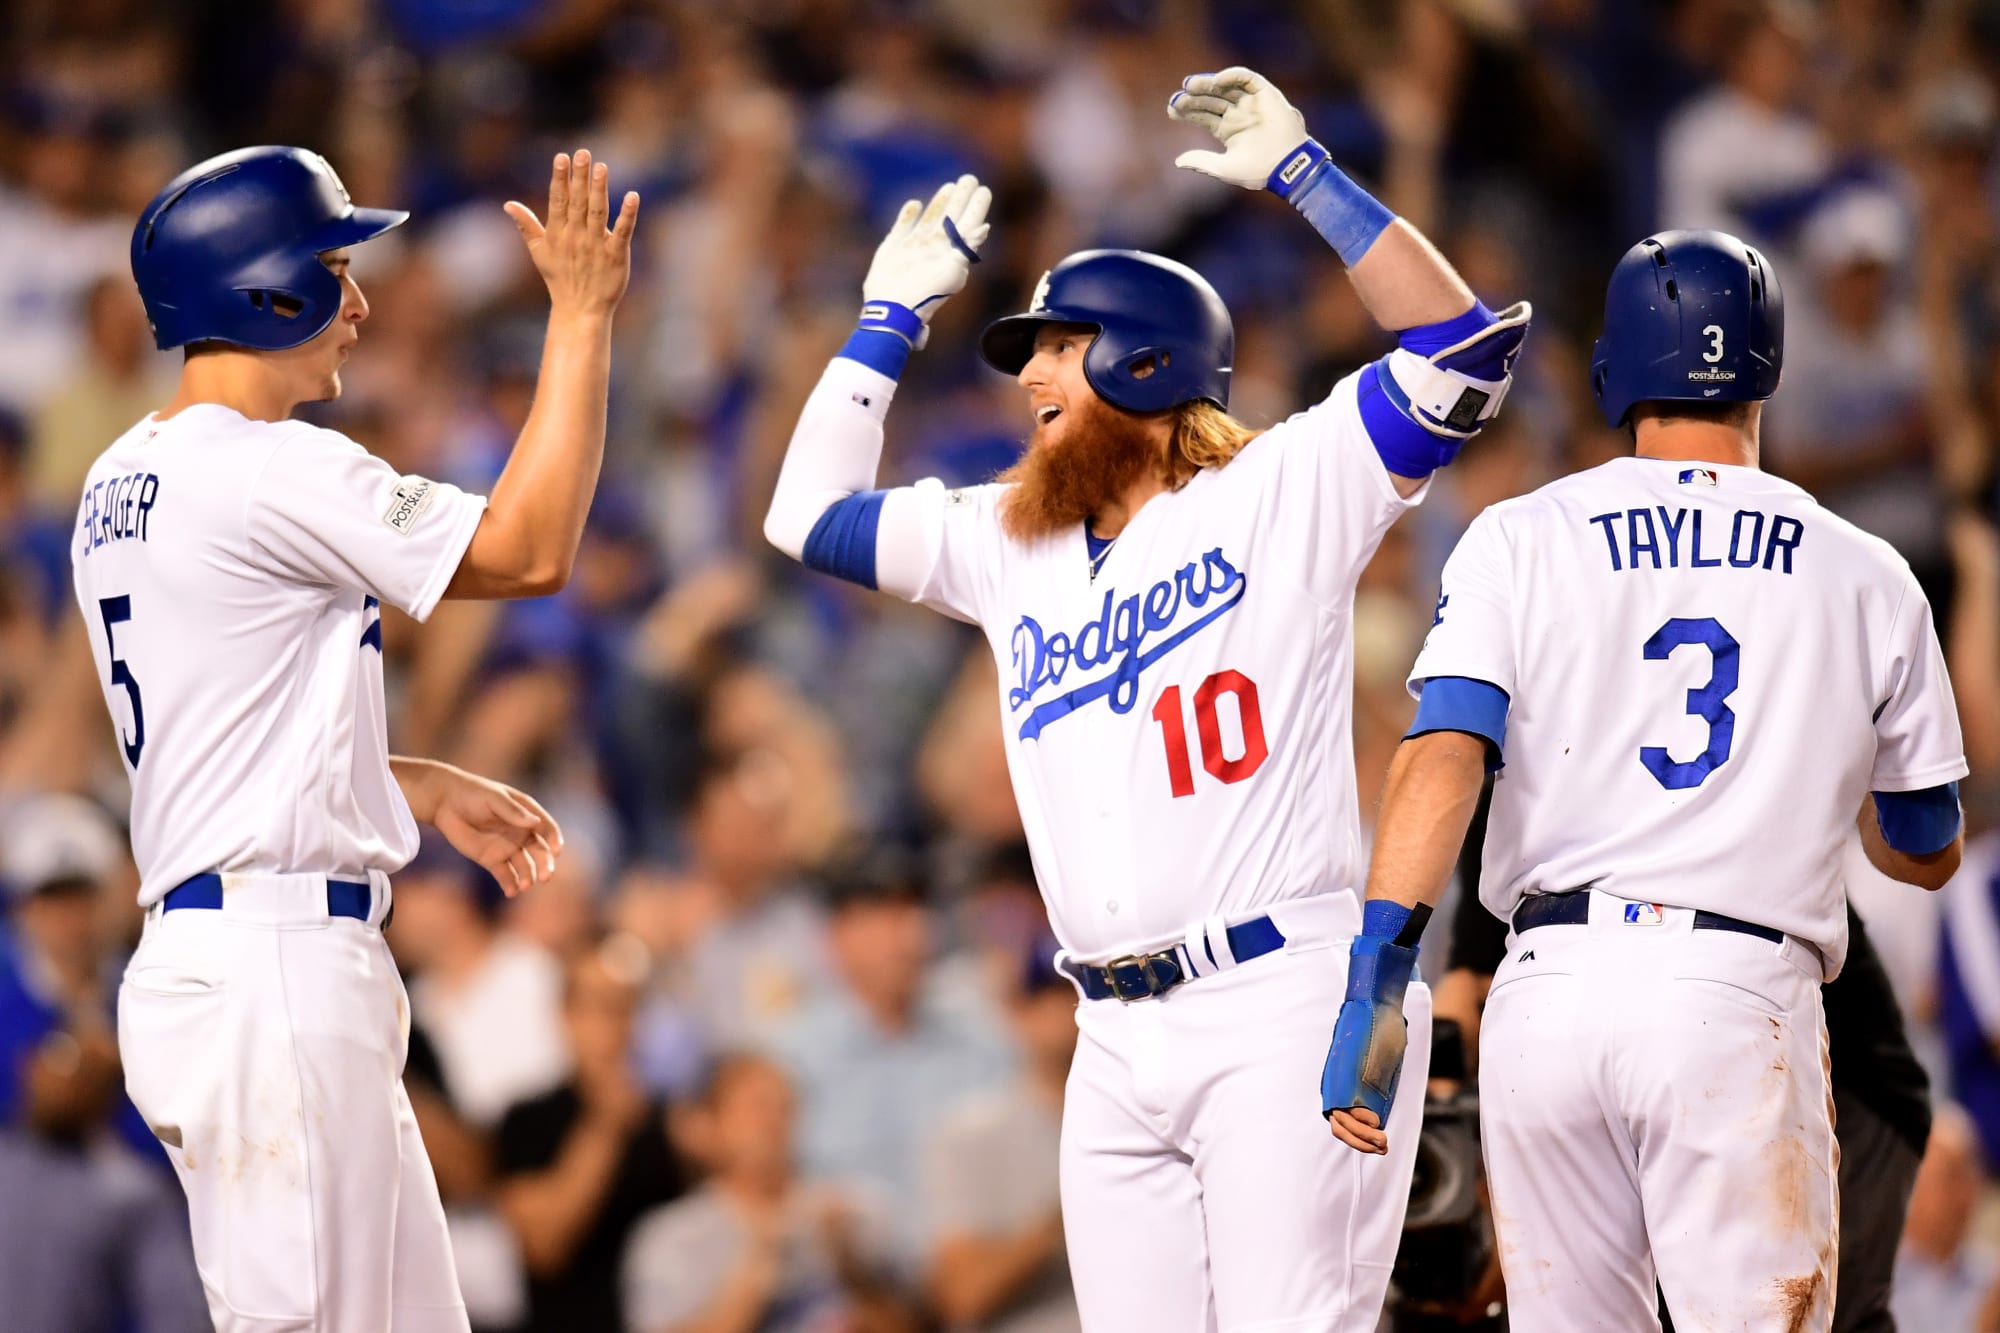 Is what we see what we'll get with 2018 Dodgers?